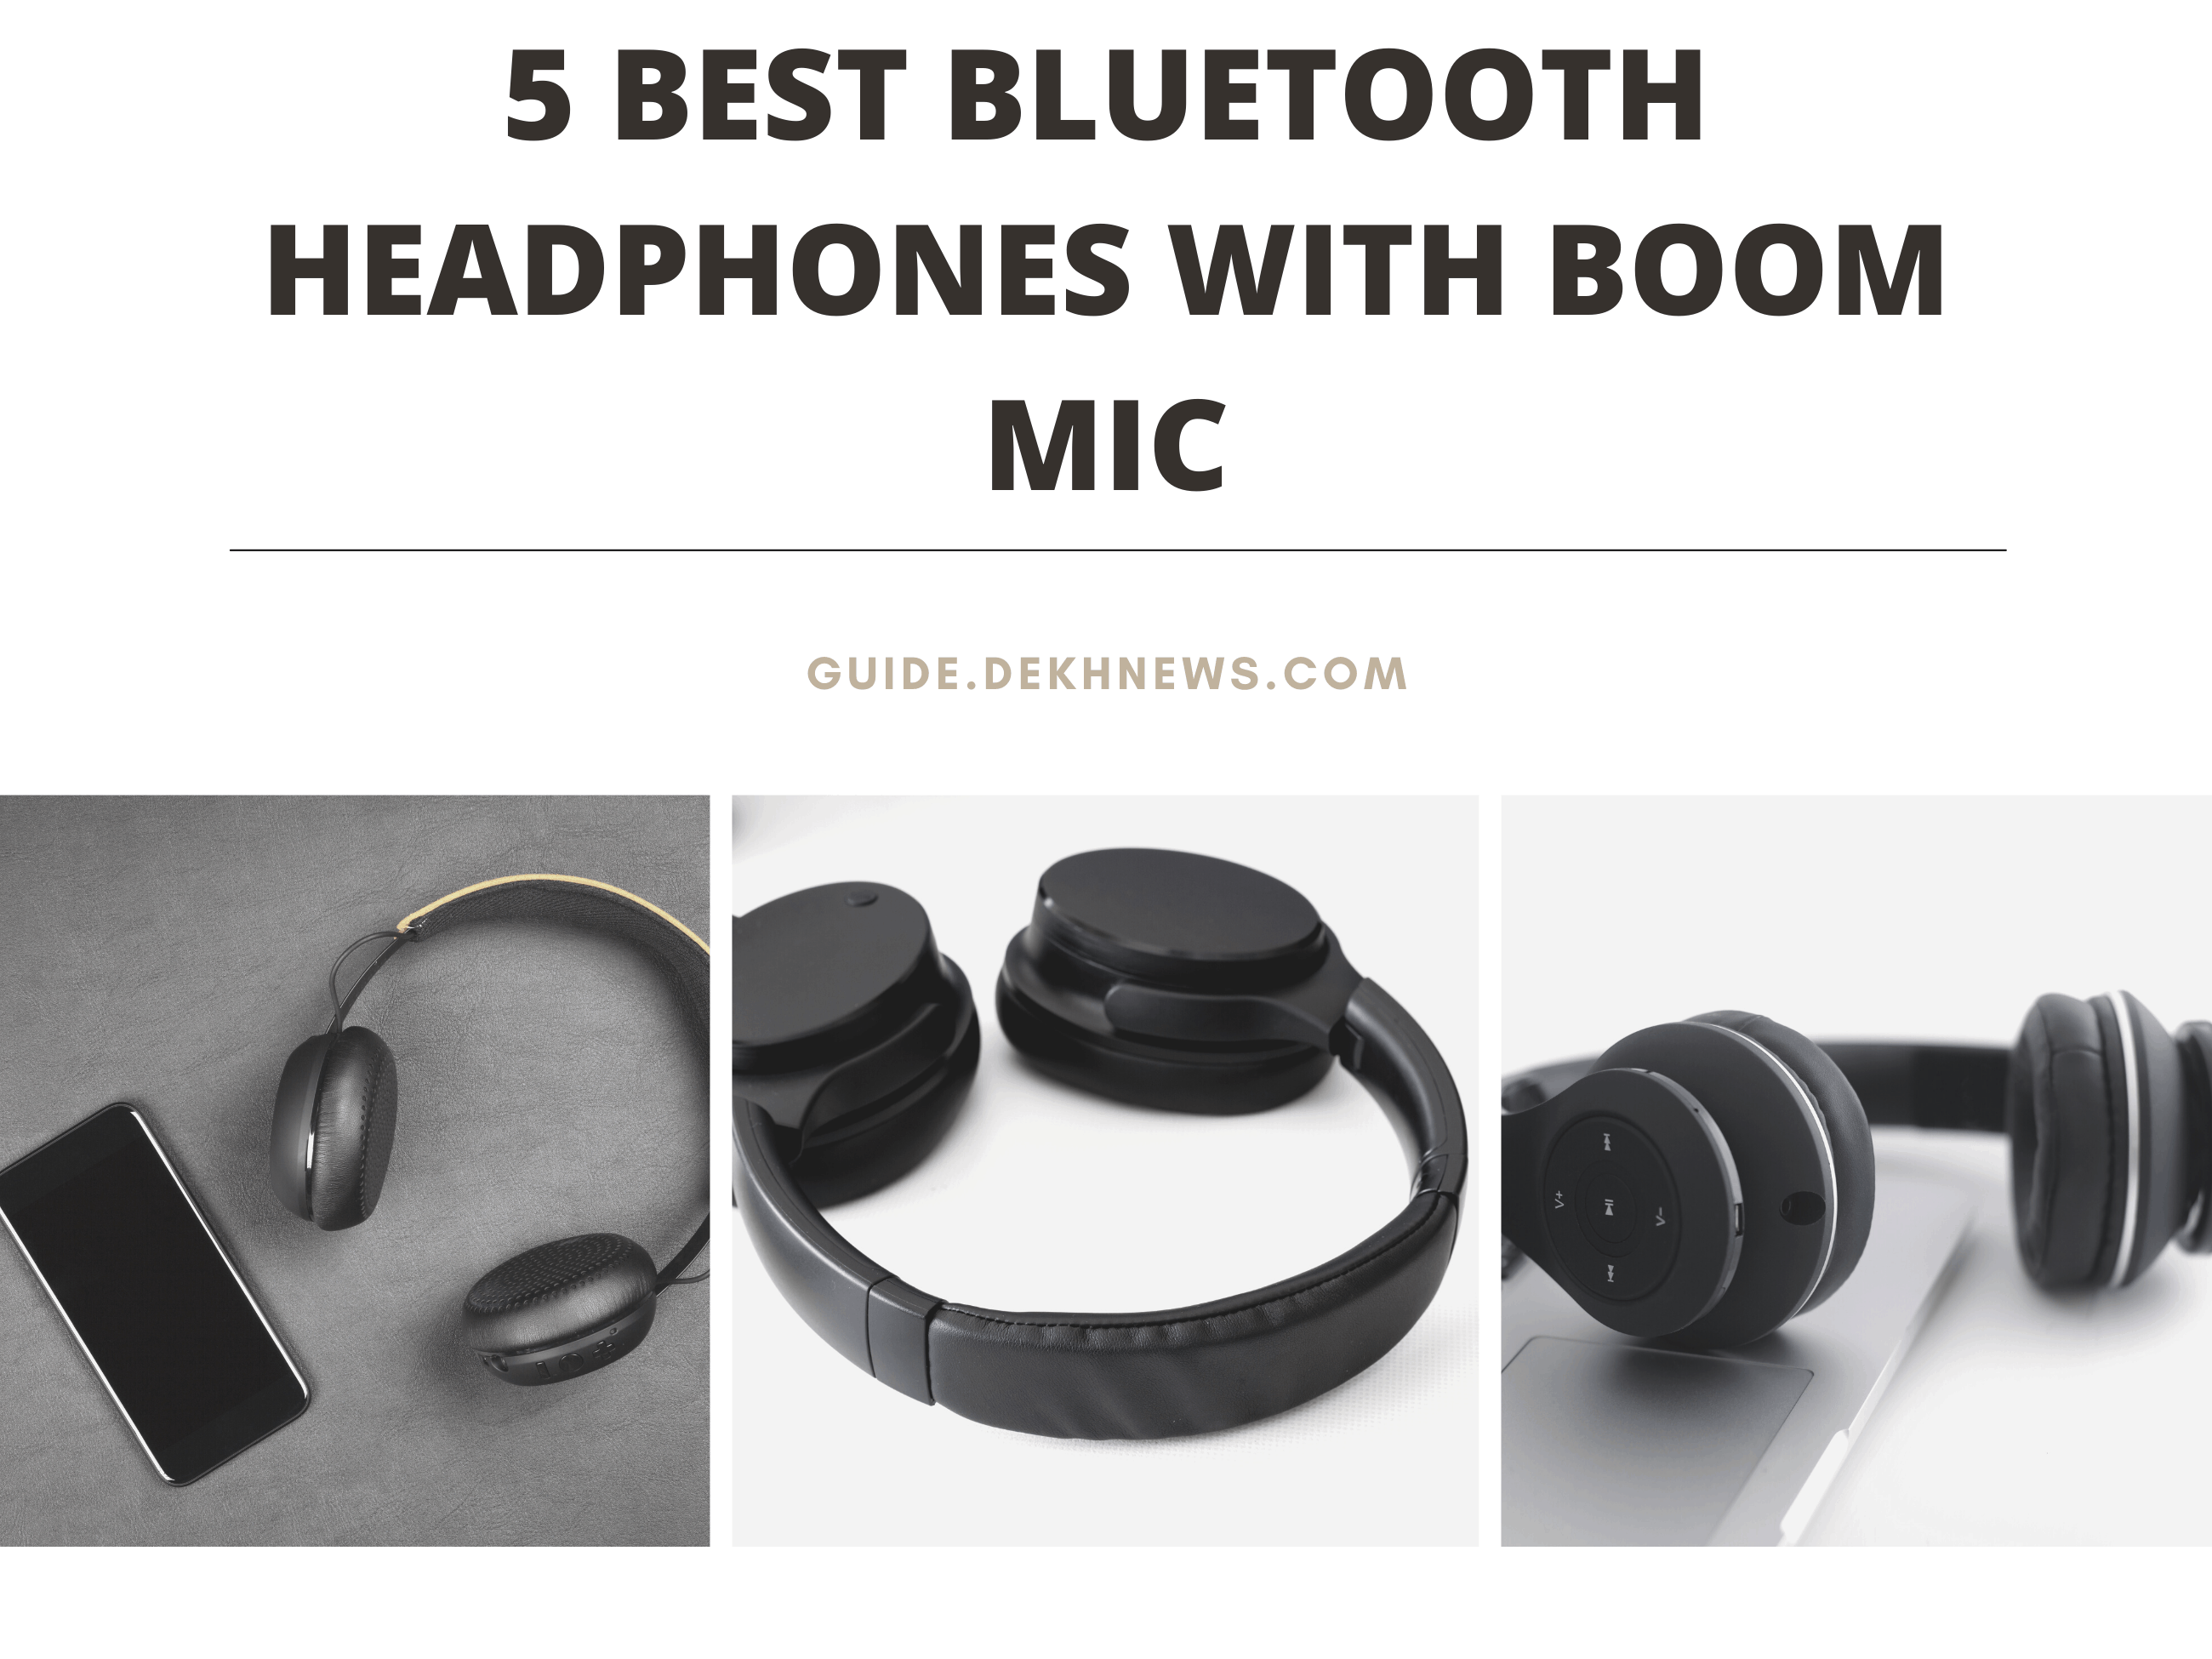 5 Best Bluetooth Headphones/Headset with Boom Mic | 2021 Guide